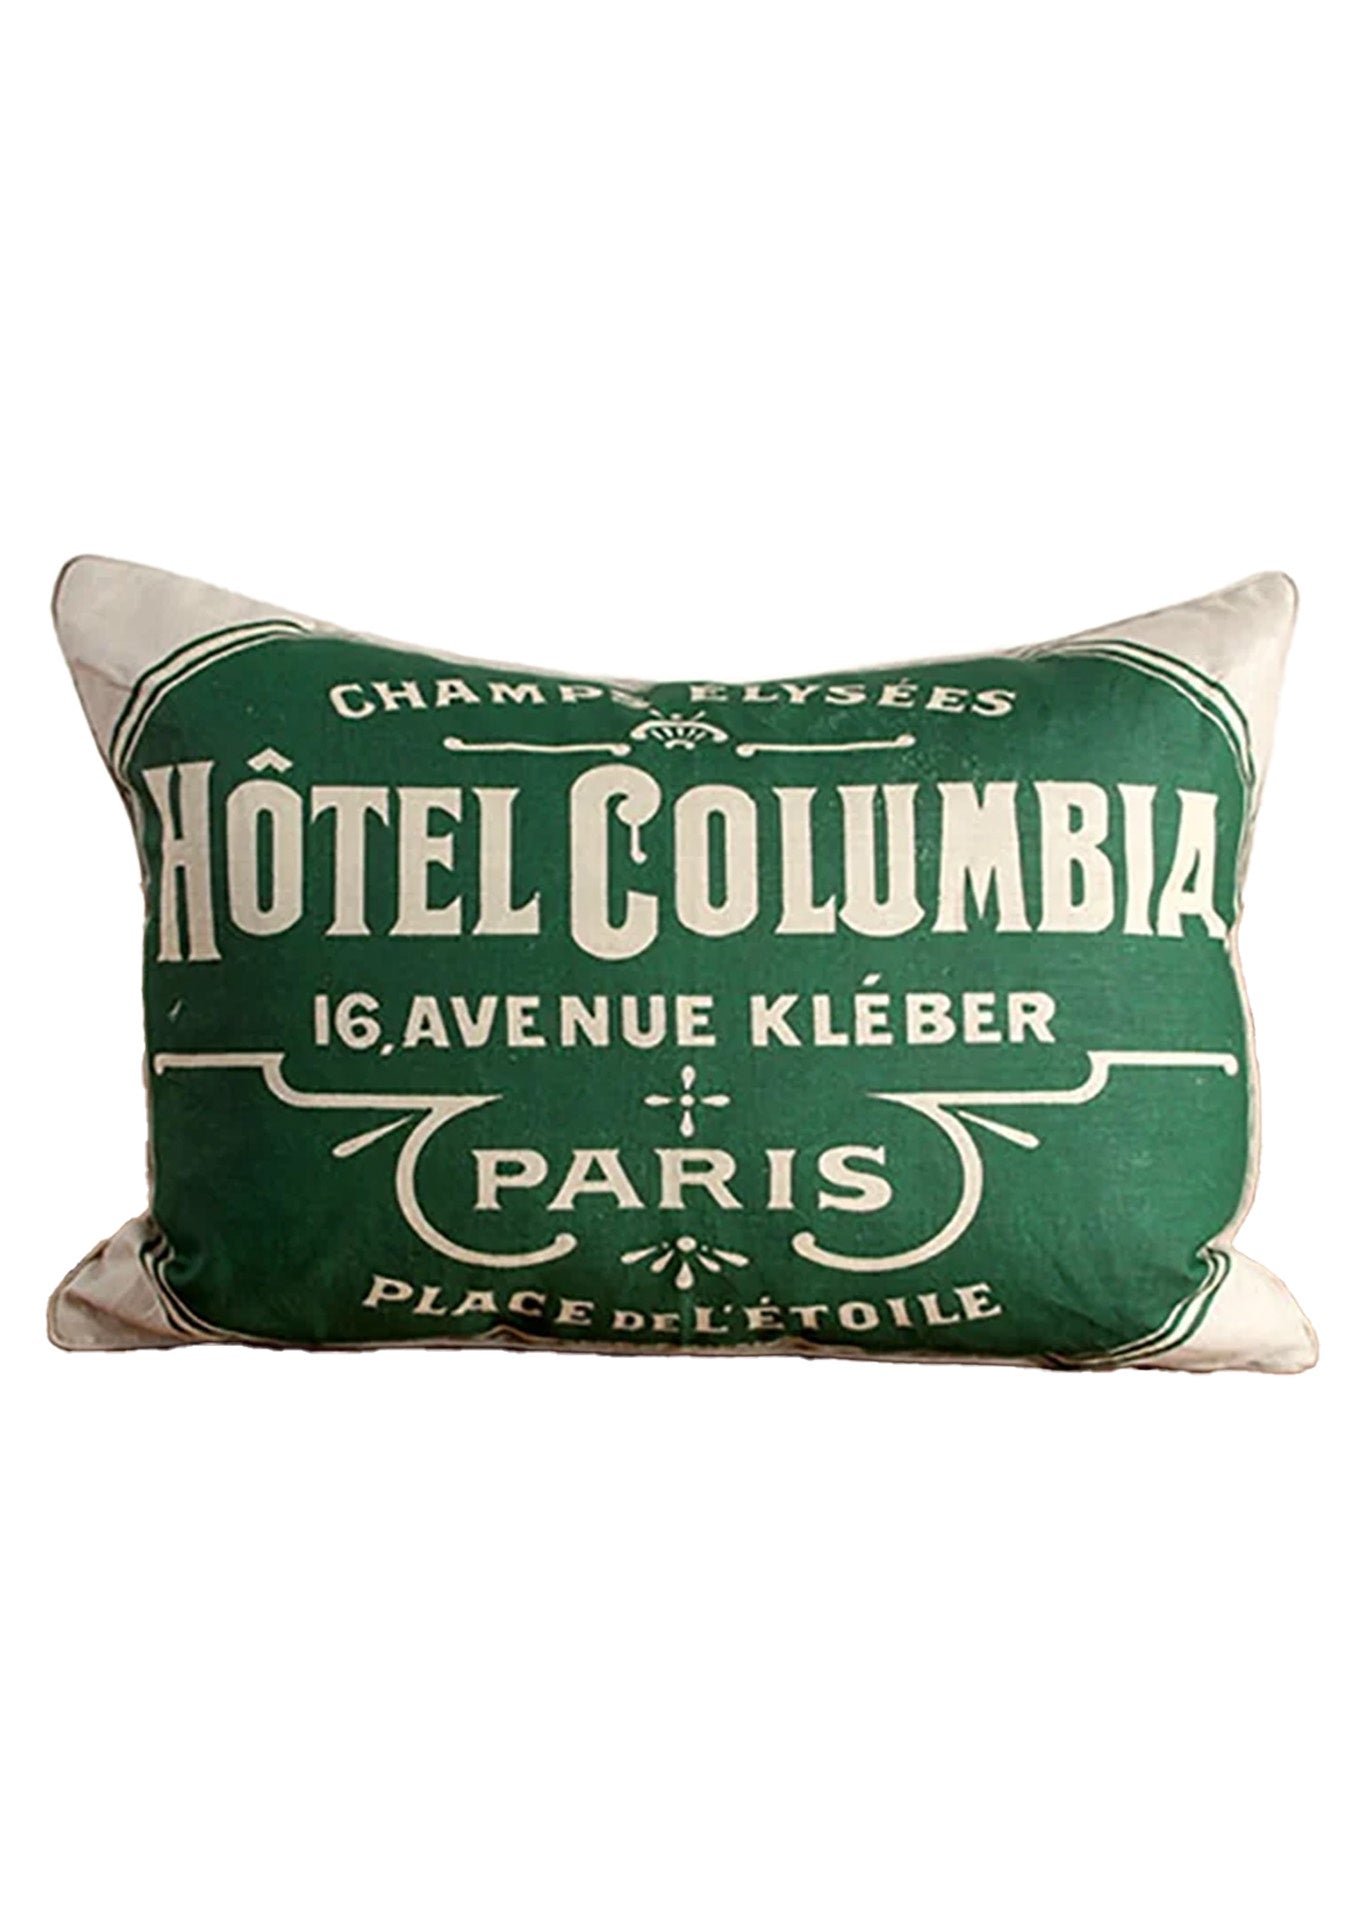 Design Legacy Hotel Columbia Chaps Elysees Pillow17x24